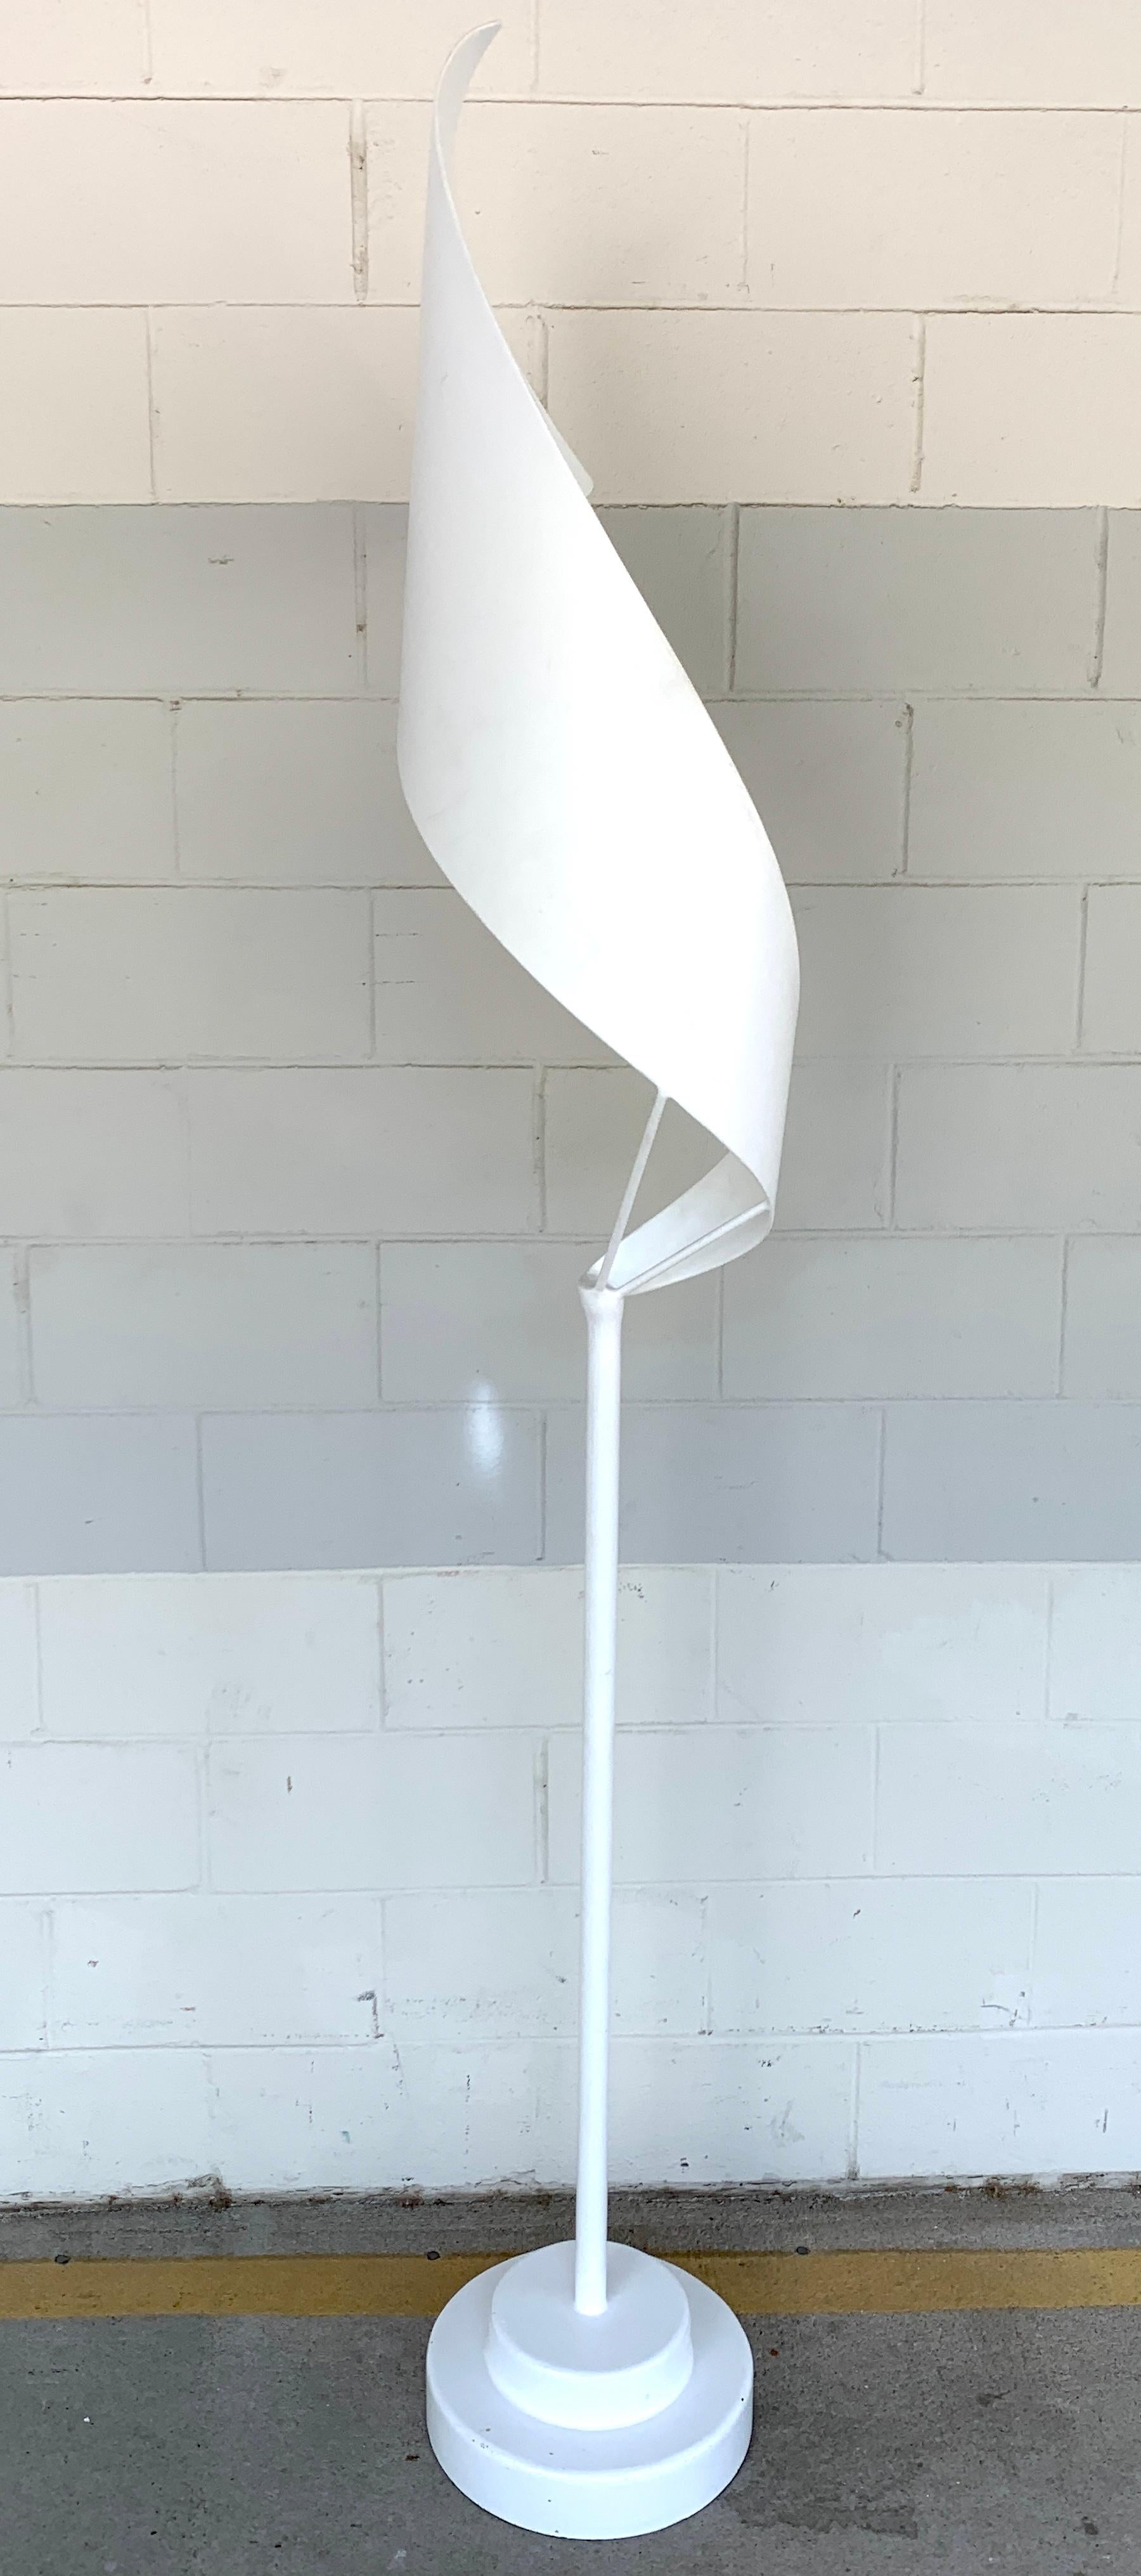 20th Century Large Modern White Enameled Forged Steel Kinetic Sculpture '95 M.G. La Mair'